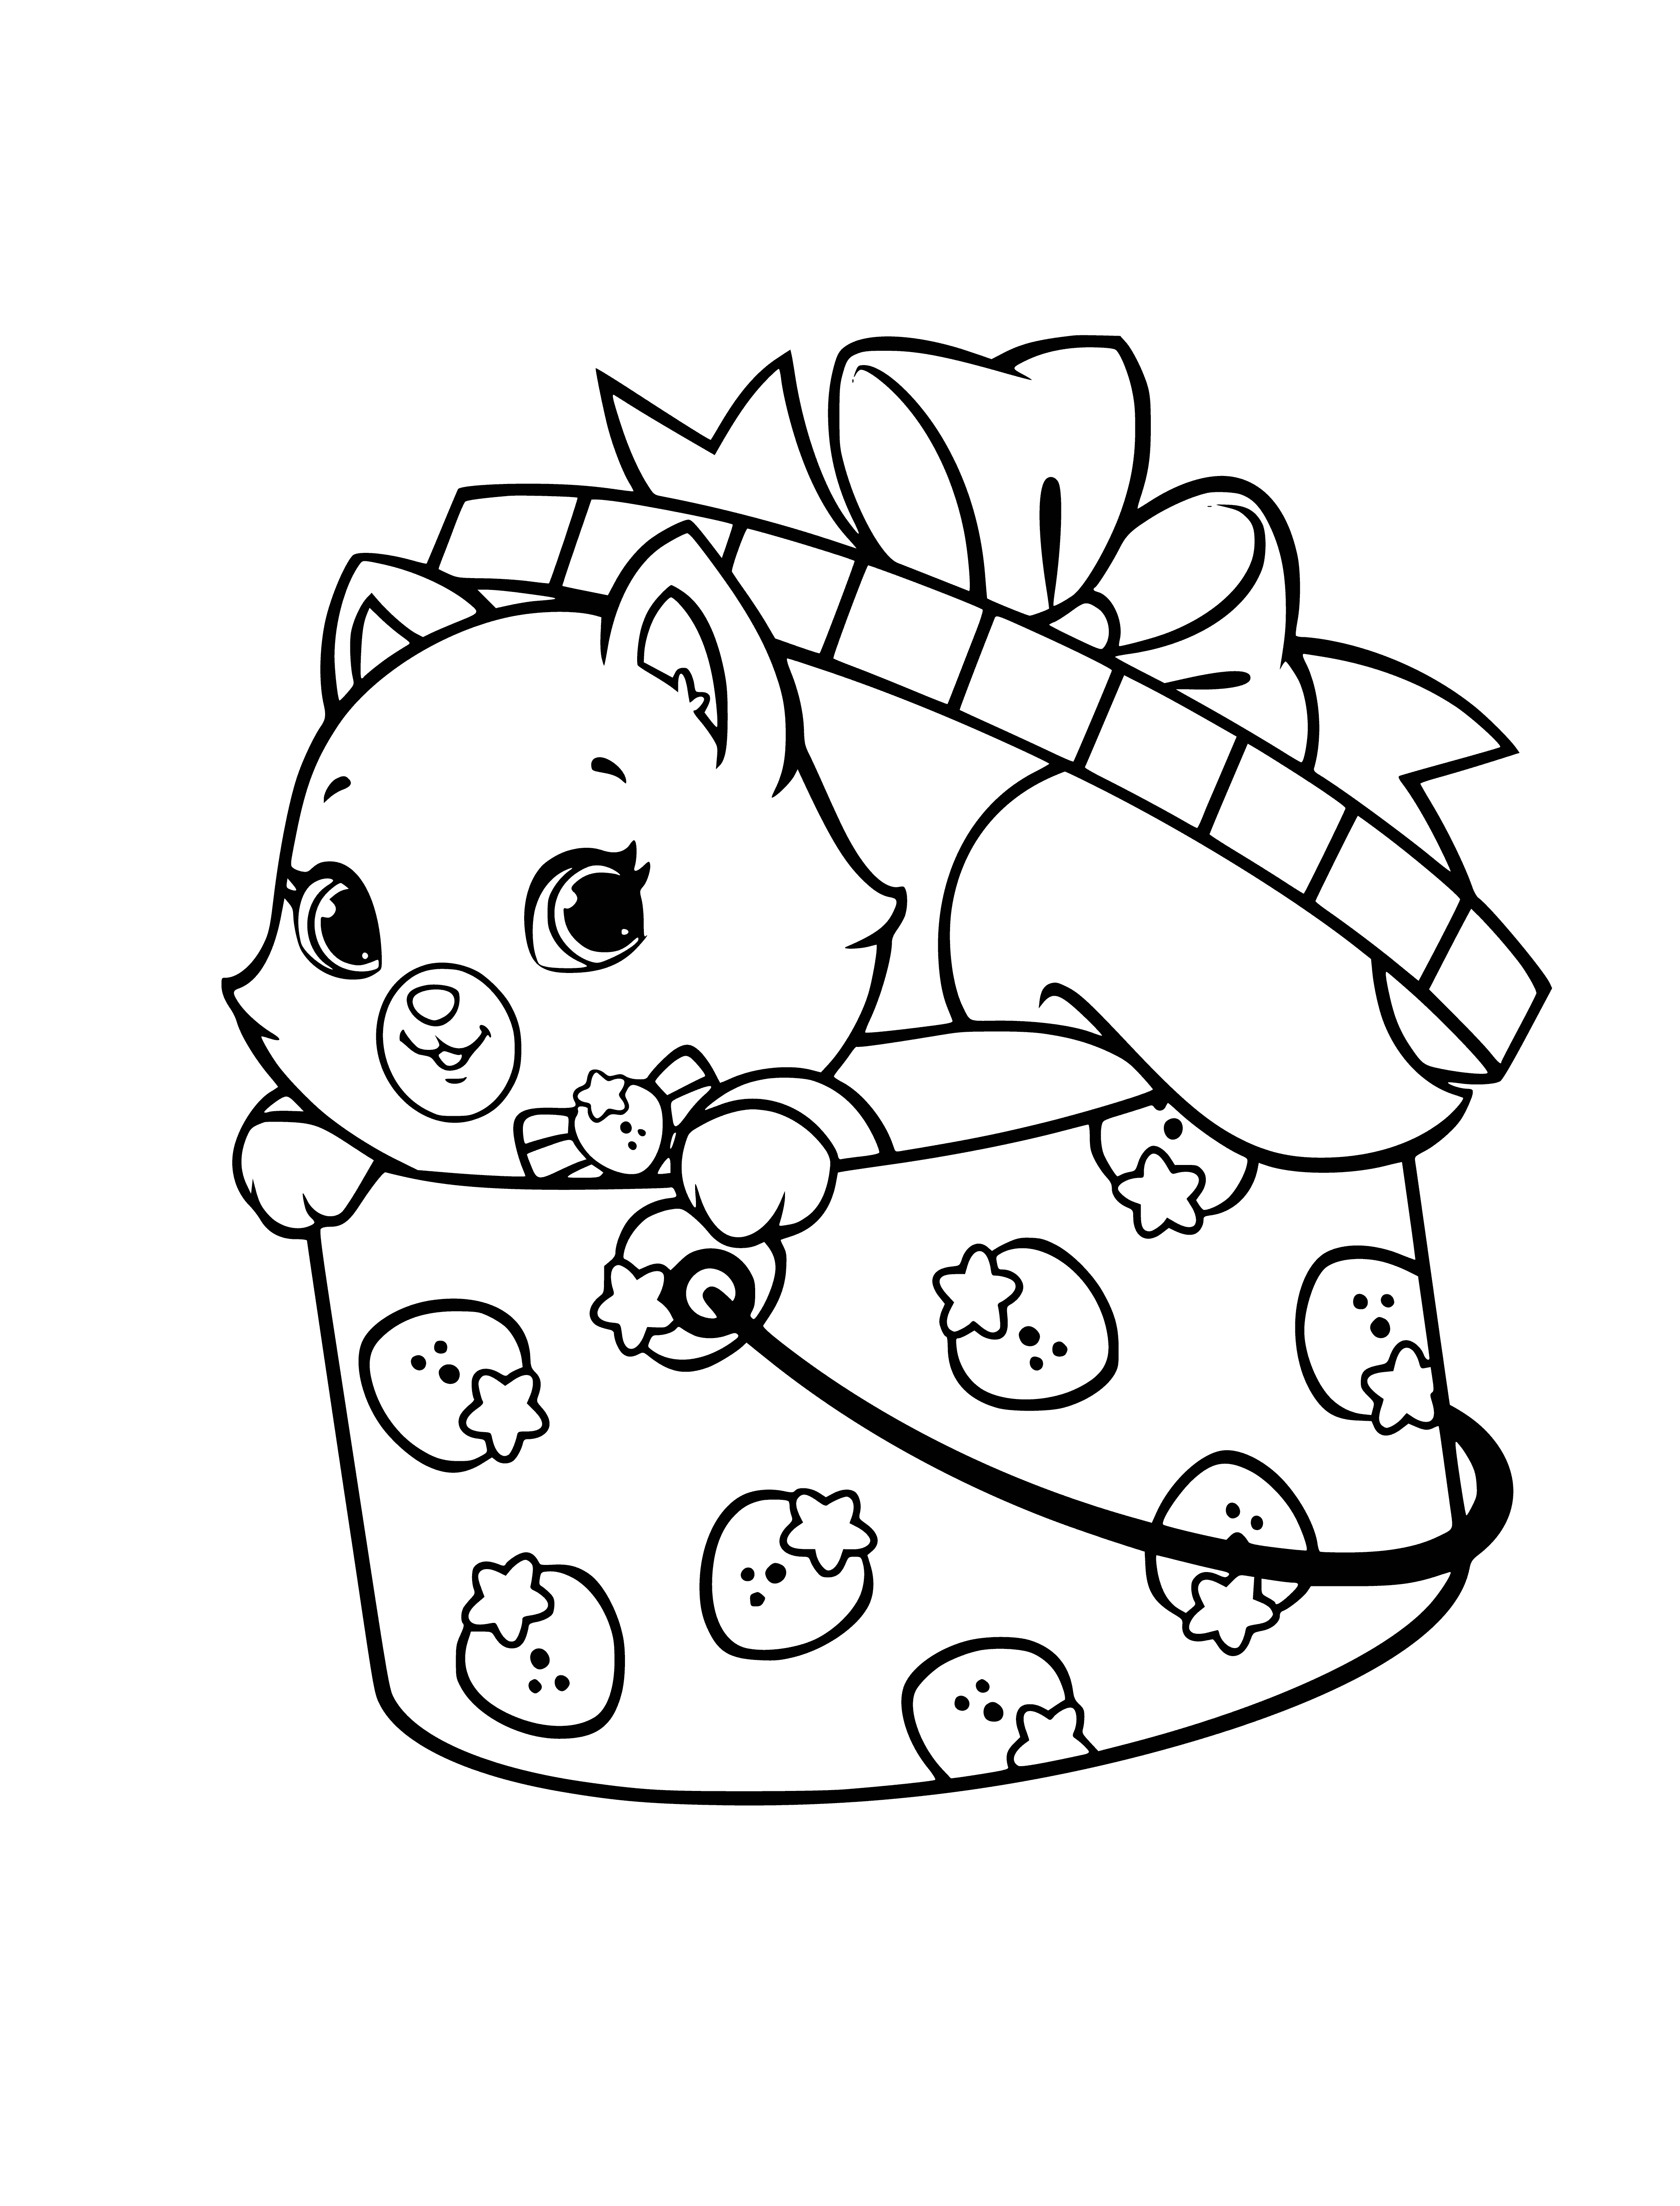 coloring page: Cute orange kitten licks paw and wears pink collar with bell. Green eyes and white spots complete the coloring page.